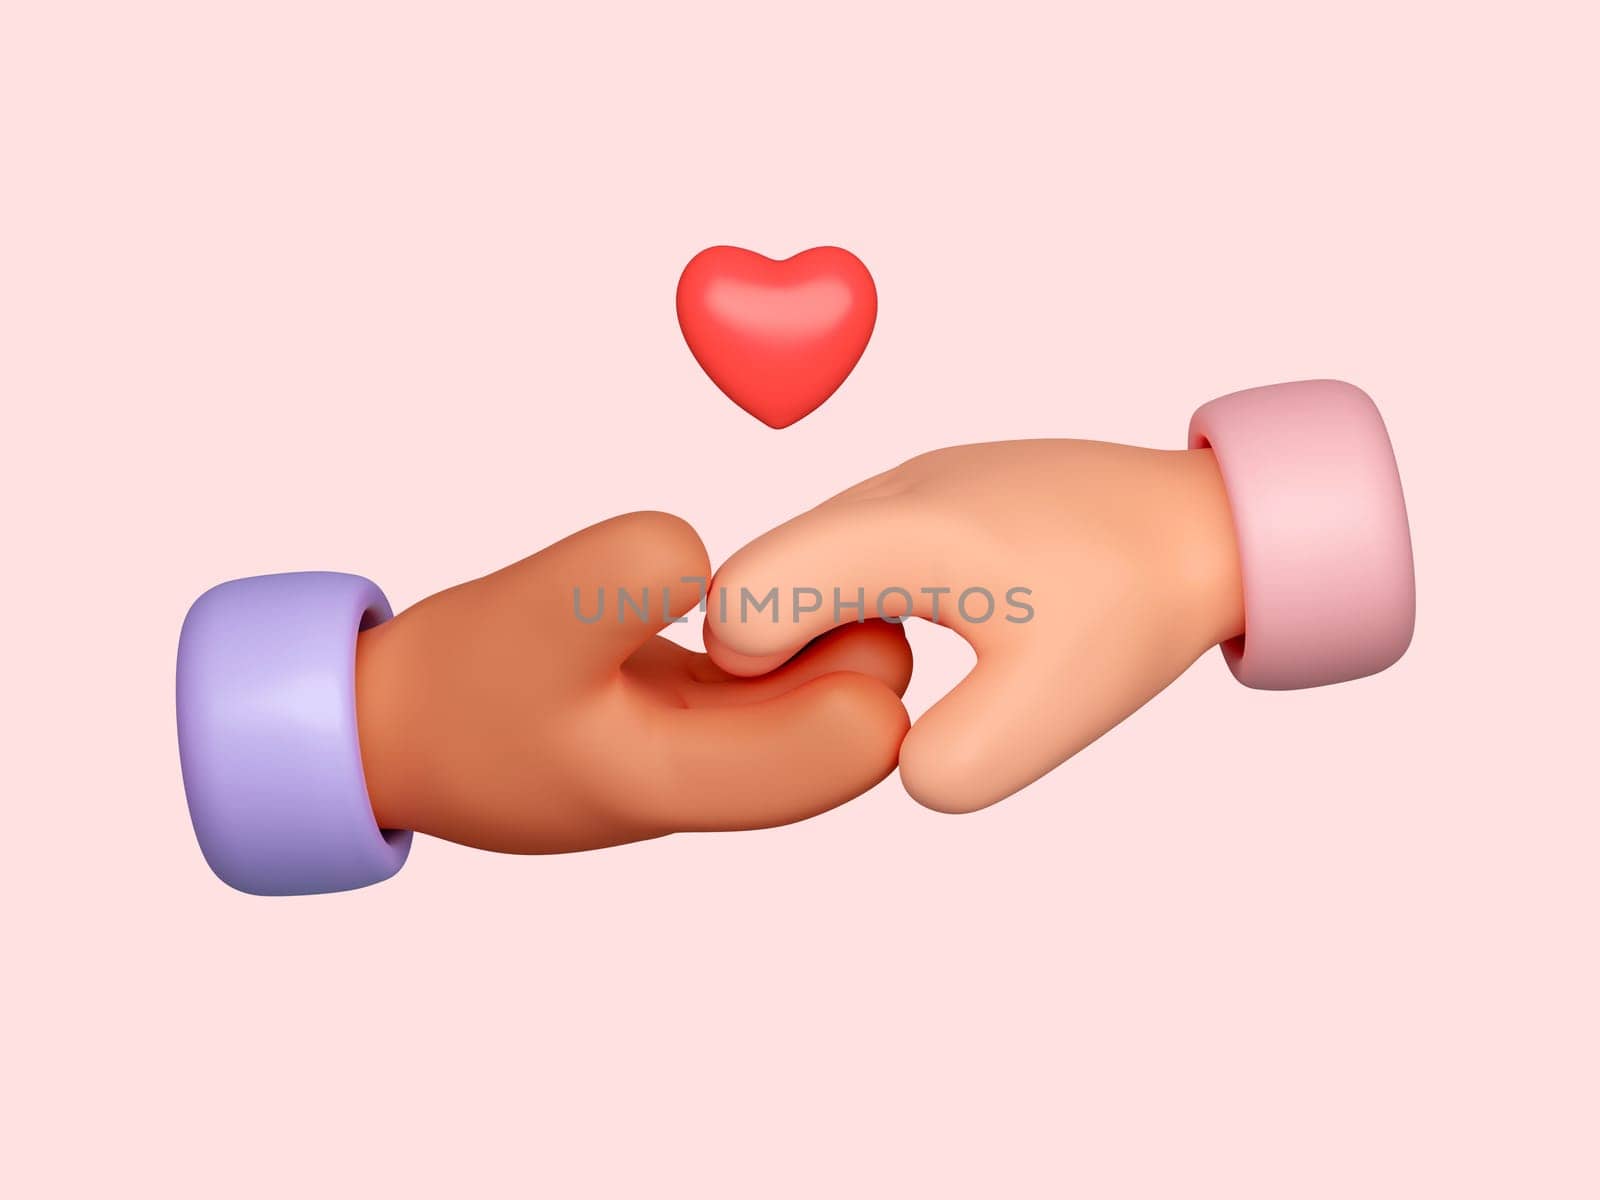 Cartoon Hands holding a red heart isolated on pink background, CSR or Corporate Social Responsibility, health care, family insurance, heart donate concept, world health day, charity donation, 3d render illustration by meepiangraphic